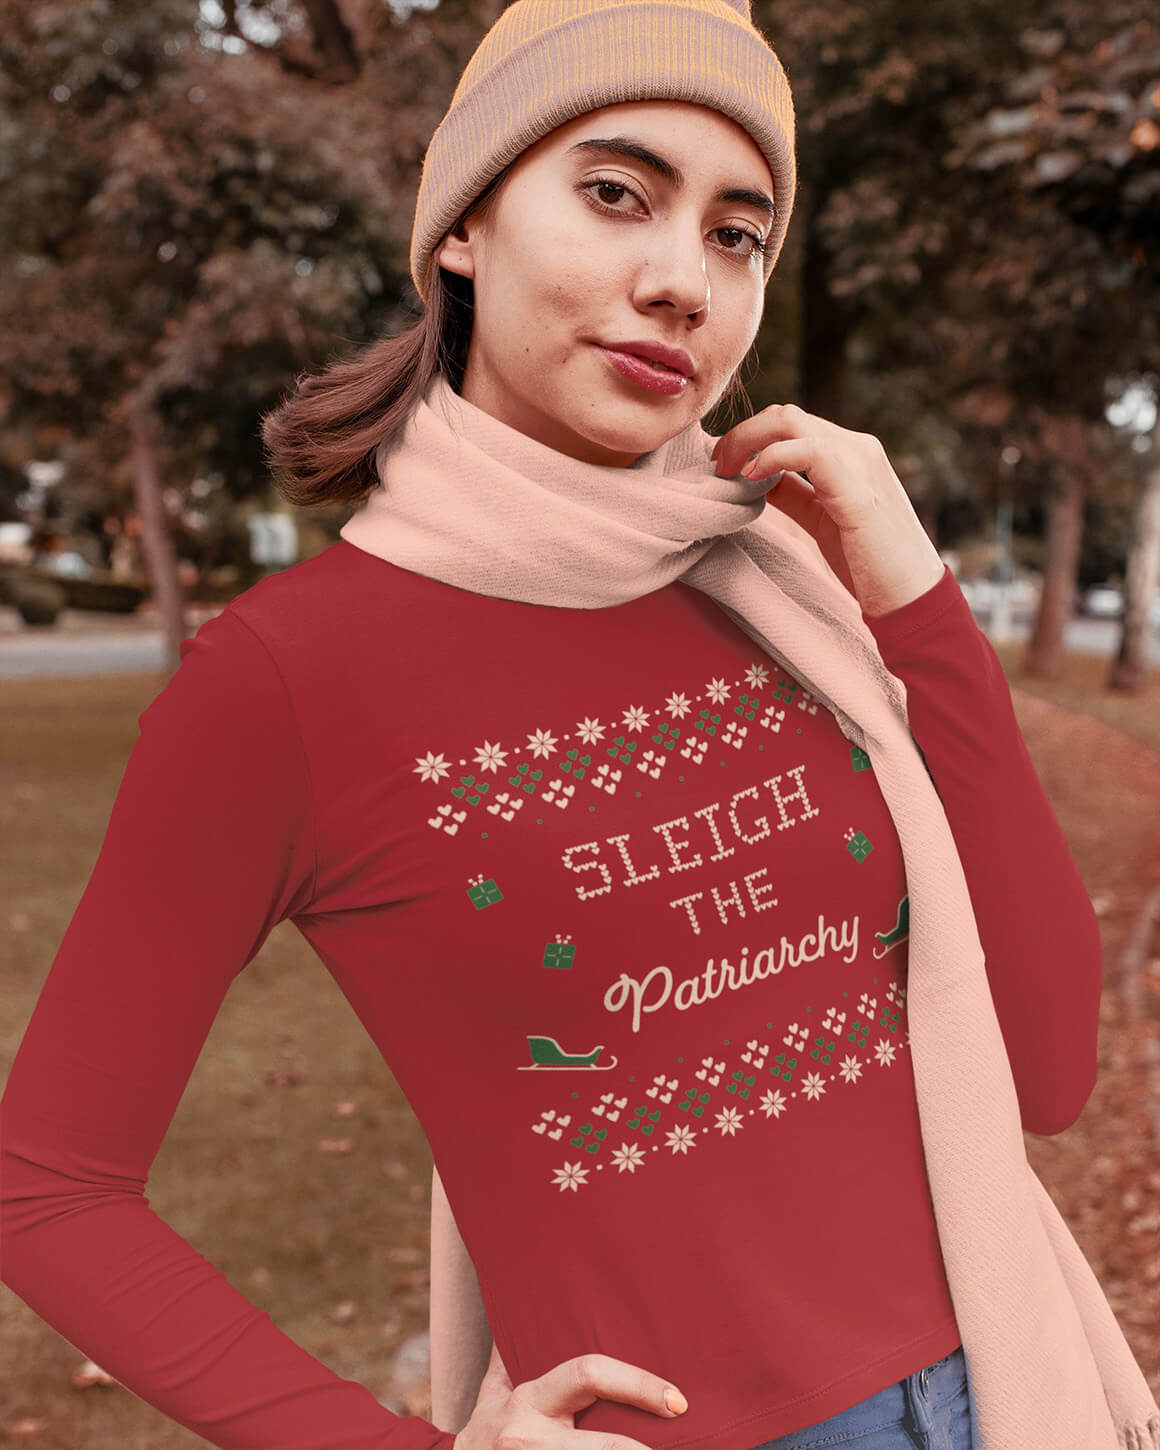 Woman outside in a scarf, beanie, and red long sleeve feminist t-shirt